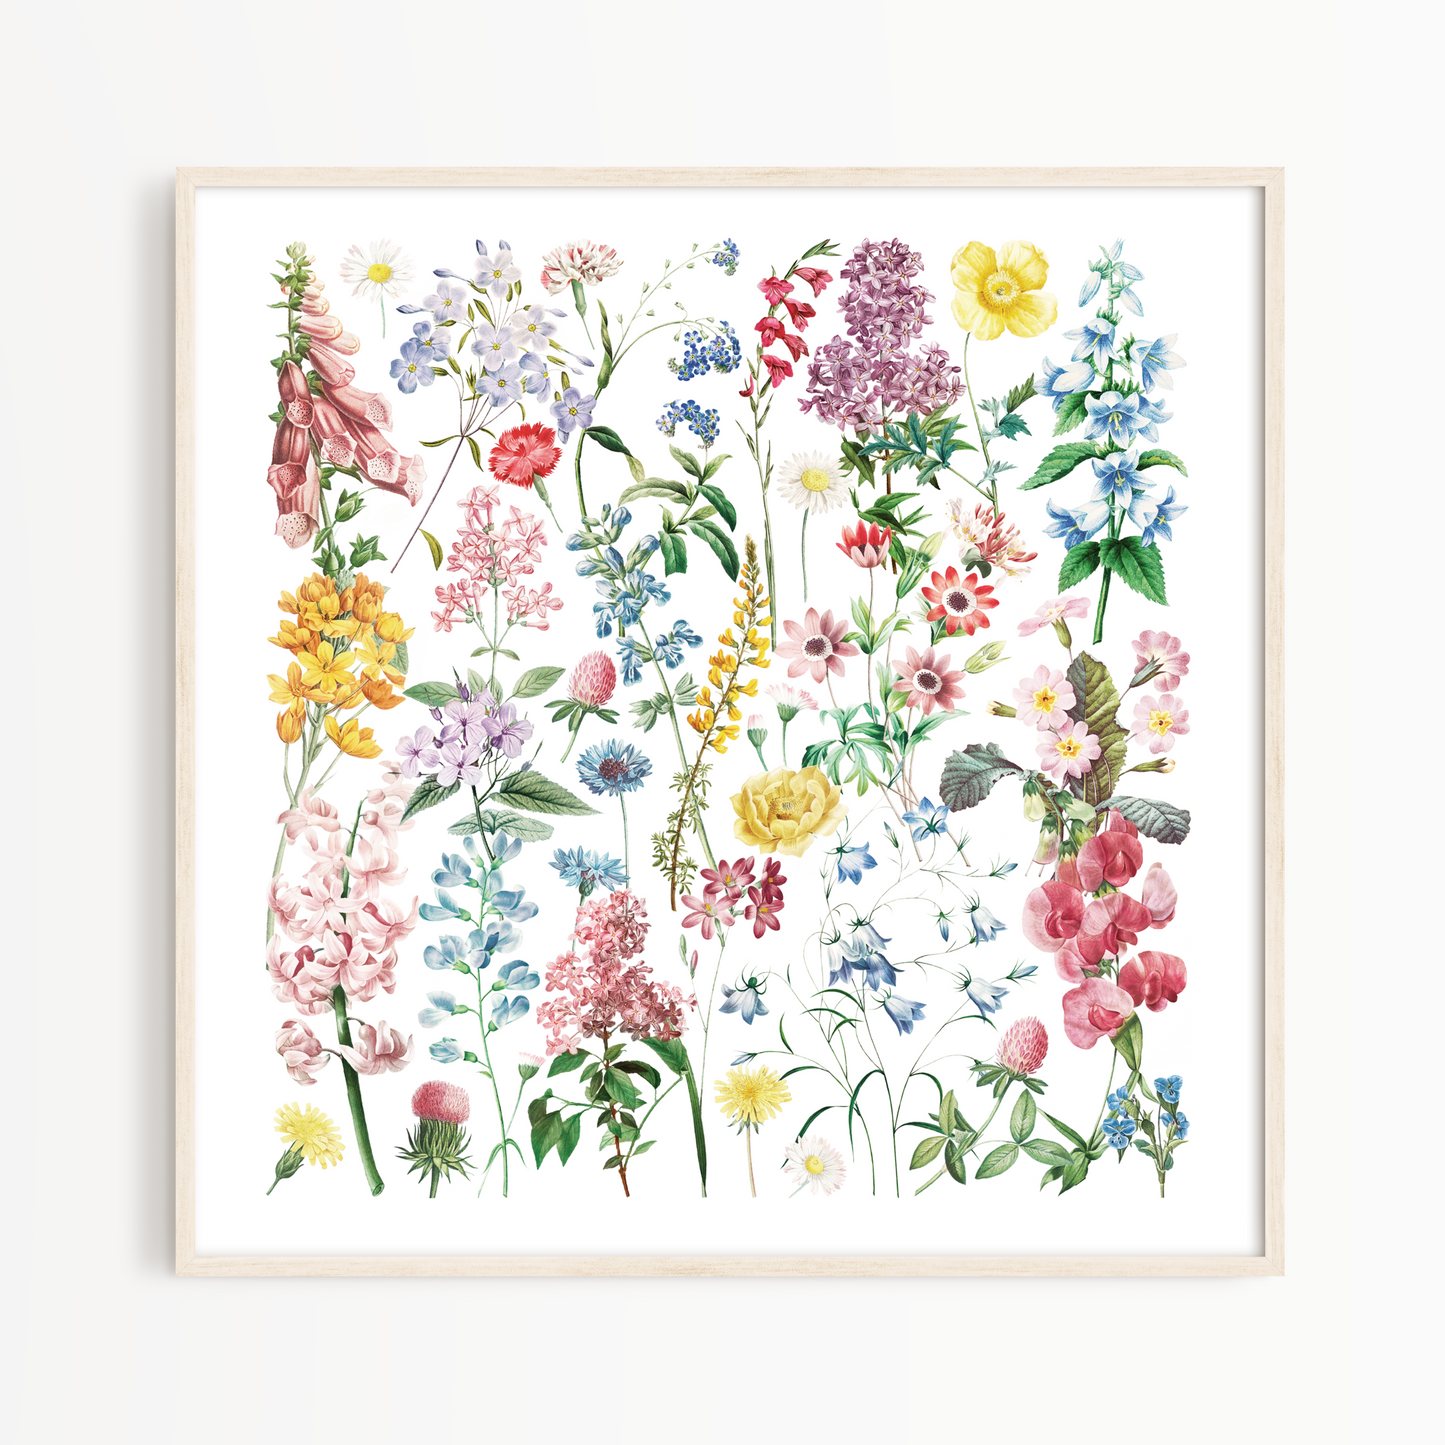 Square-shaped art print showing colourful British wild flower and garden flower watercolour painting illustrations. Flowers include foxglove, daisy, cornflower, sweet peas, forget me nots, hyacinths, red clover and primroses. 